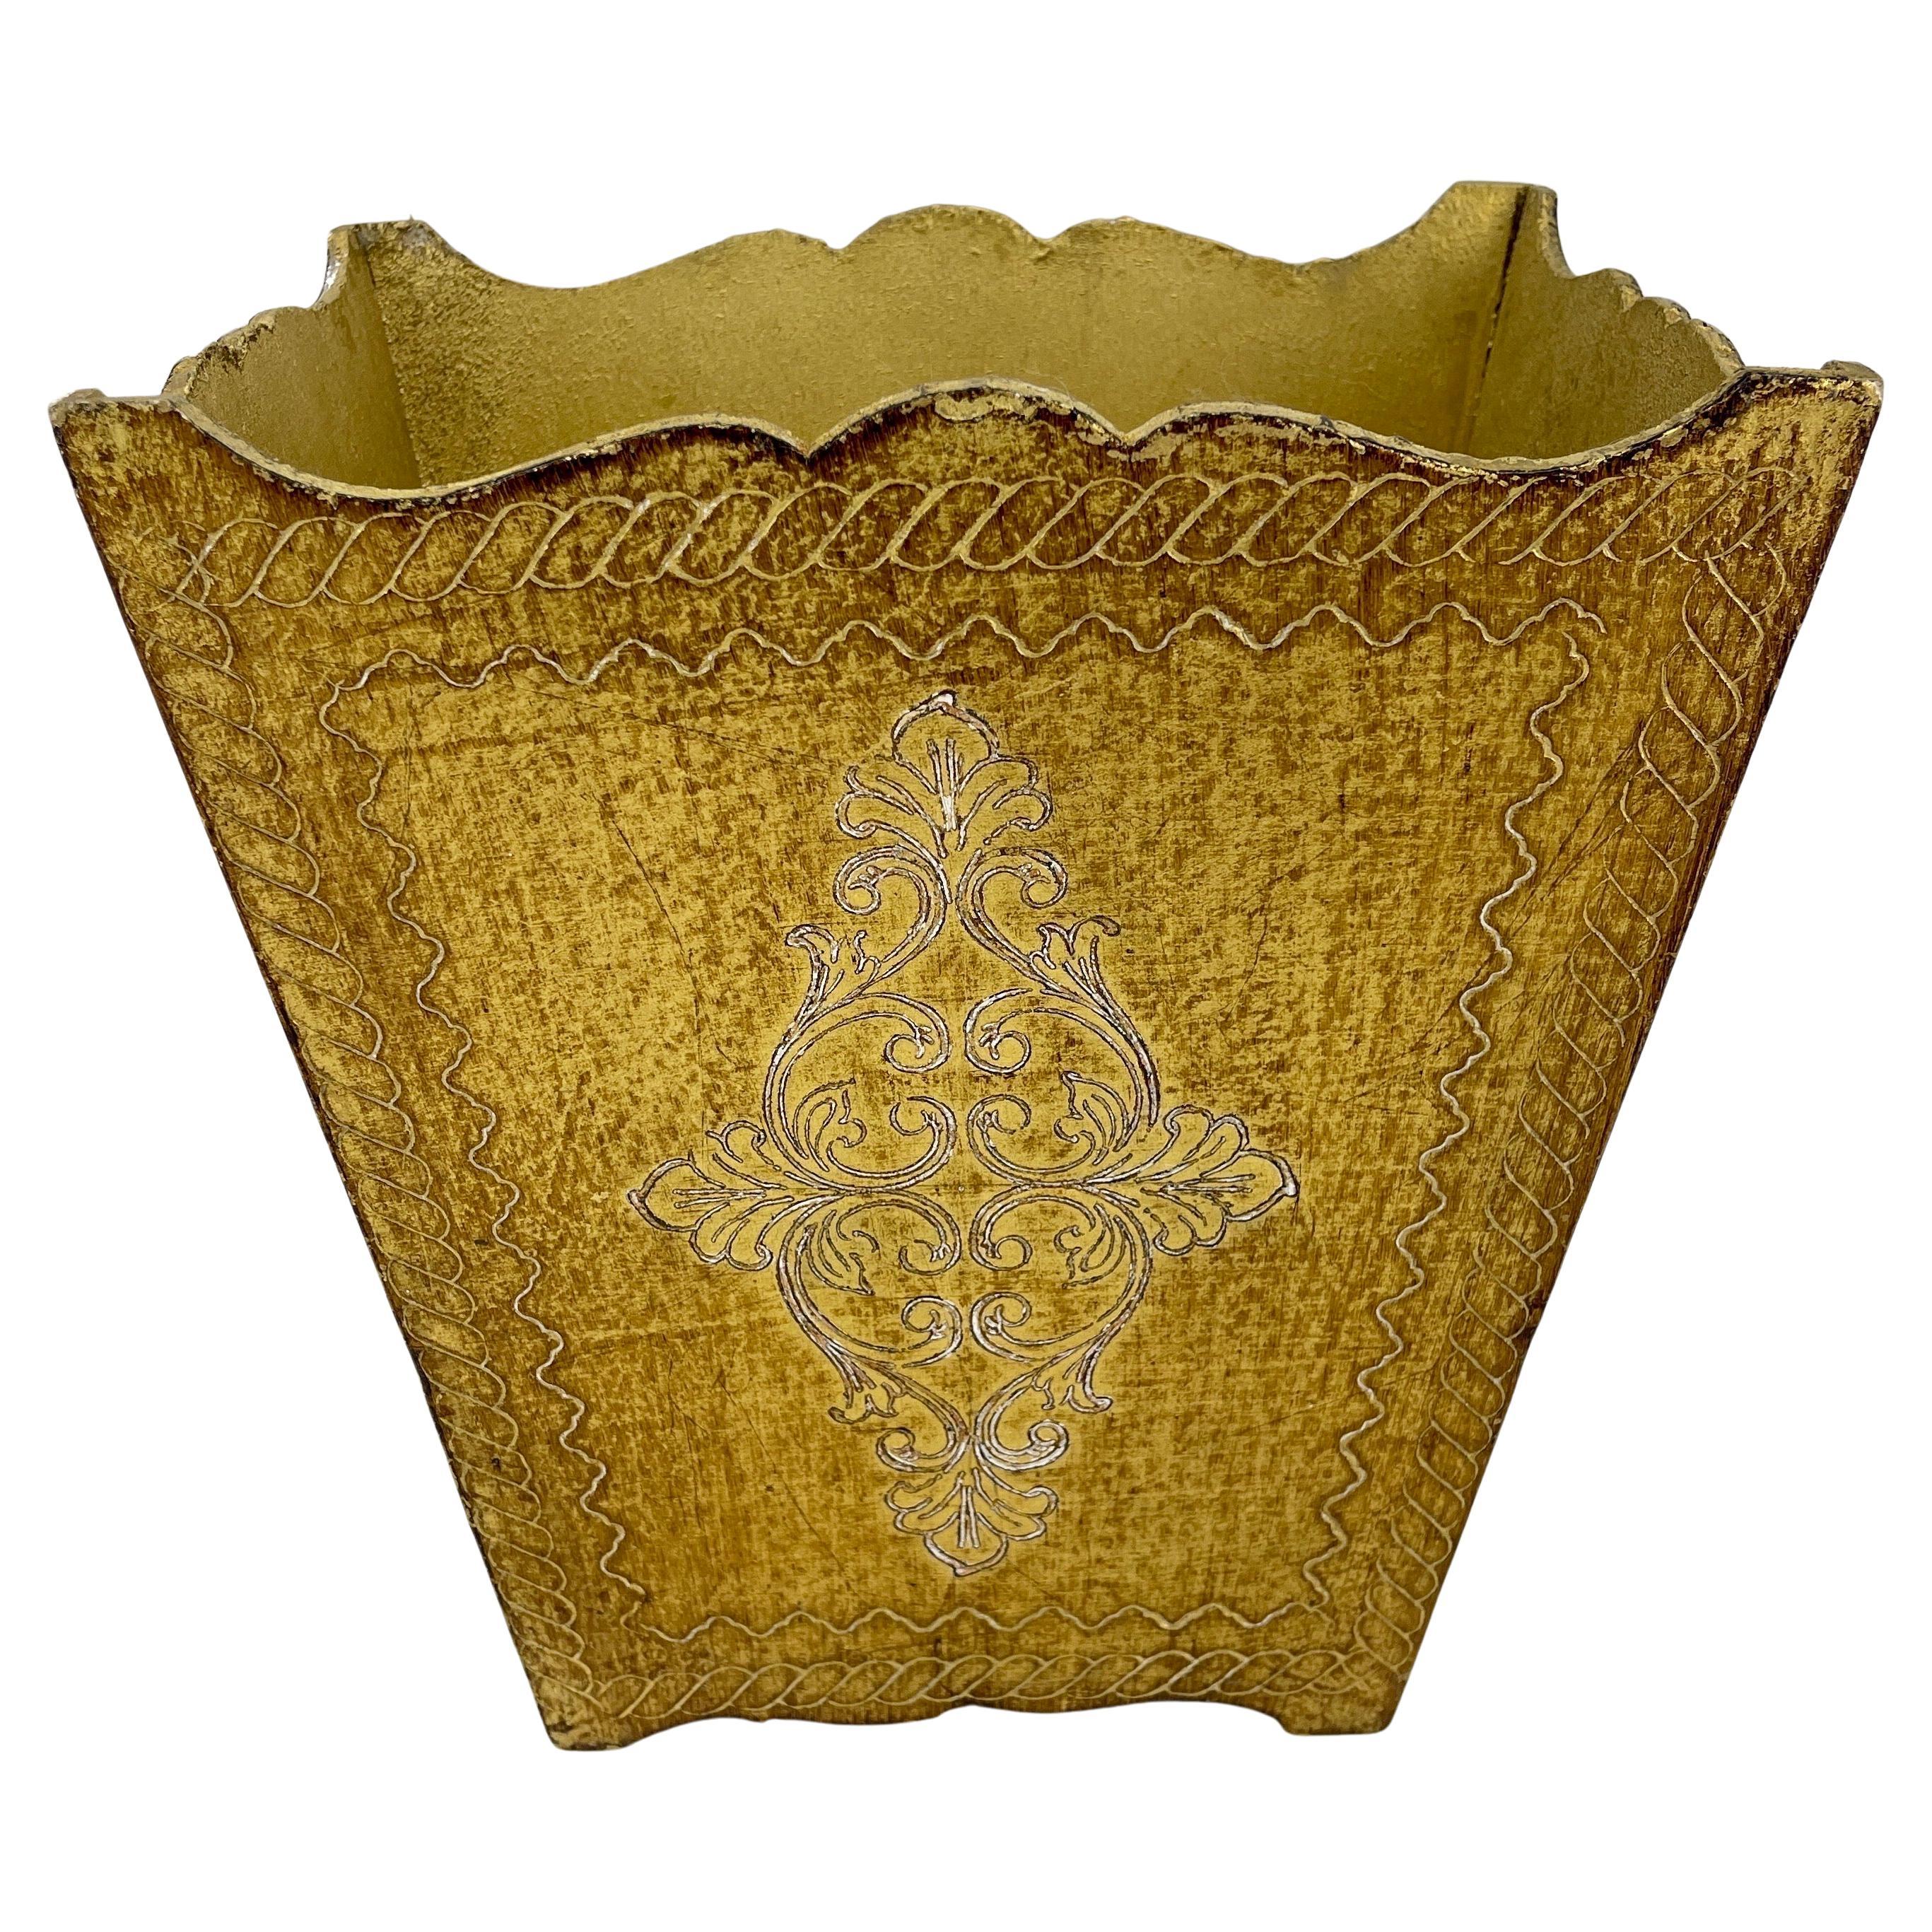 Signed Italian Florentine trash can or waste basket.

Nicely gilt decorated Italian neoclassical Florentine waste basket with hand decorated gold engraved patterned design. Perfect addition to you bedroom, vanity space, office powder bath room.